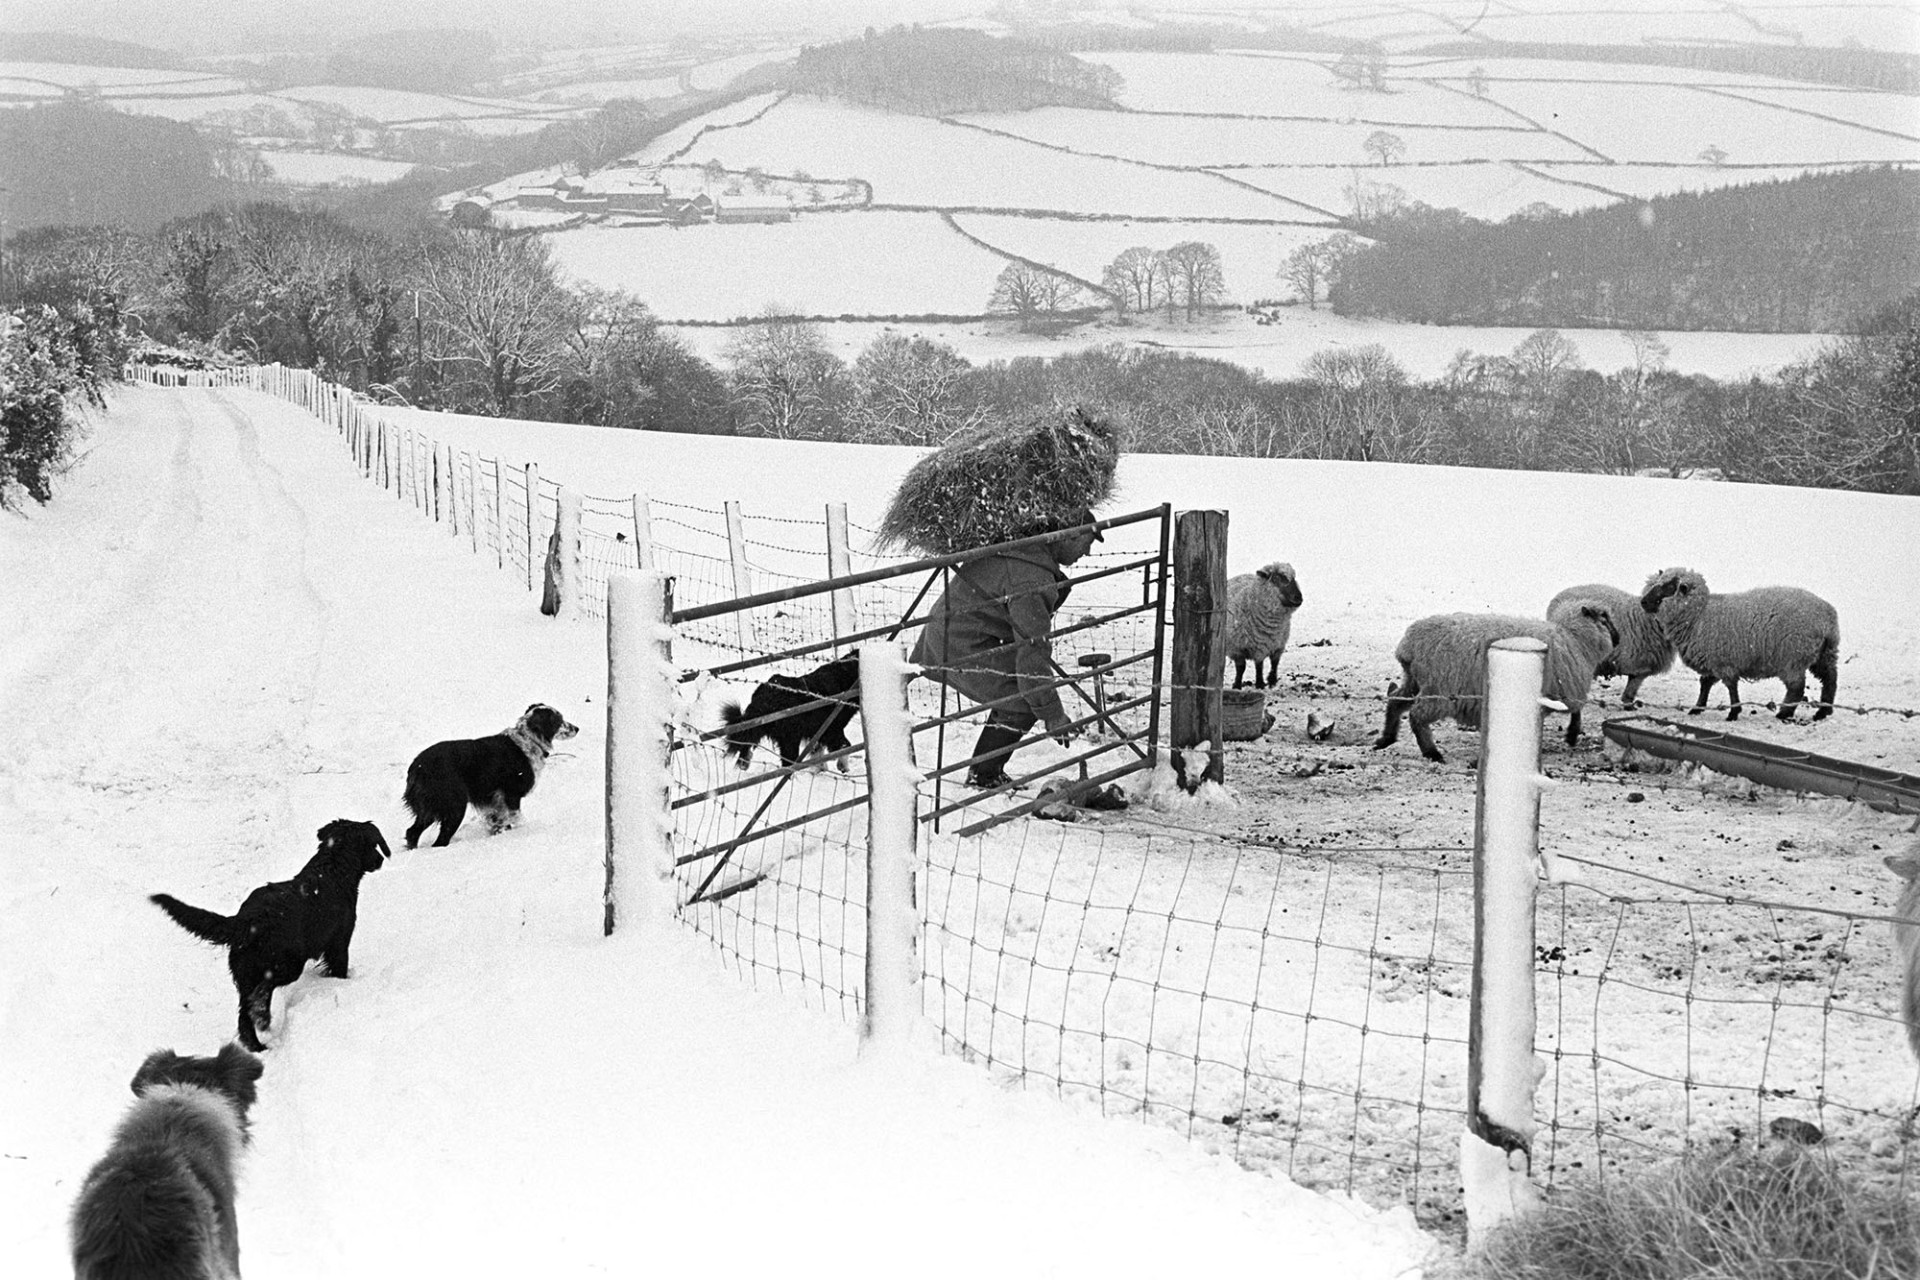 Snow, farmer with hay for sheep, dogs. 
[George Ayre entering a snow covered field carrying a bale of hay to give to sheep at Ashwell, Dolton. He is followed by four dogs. In the background a landscape of snow covered fields, farm buildings and trees in visible.]